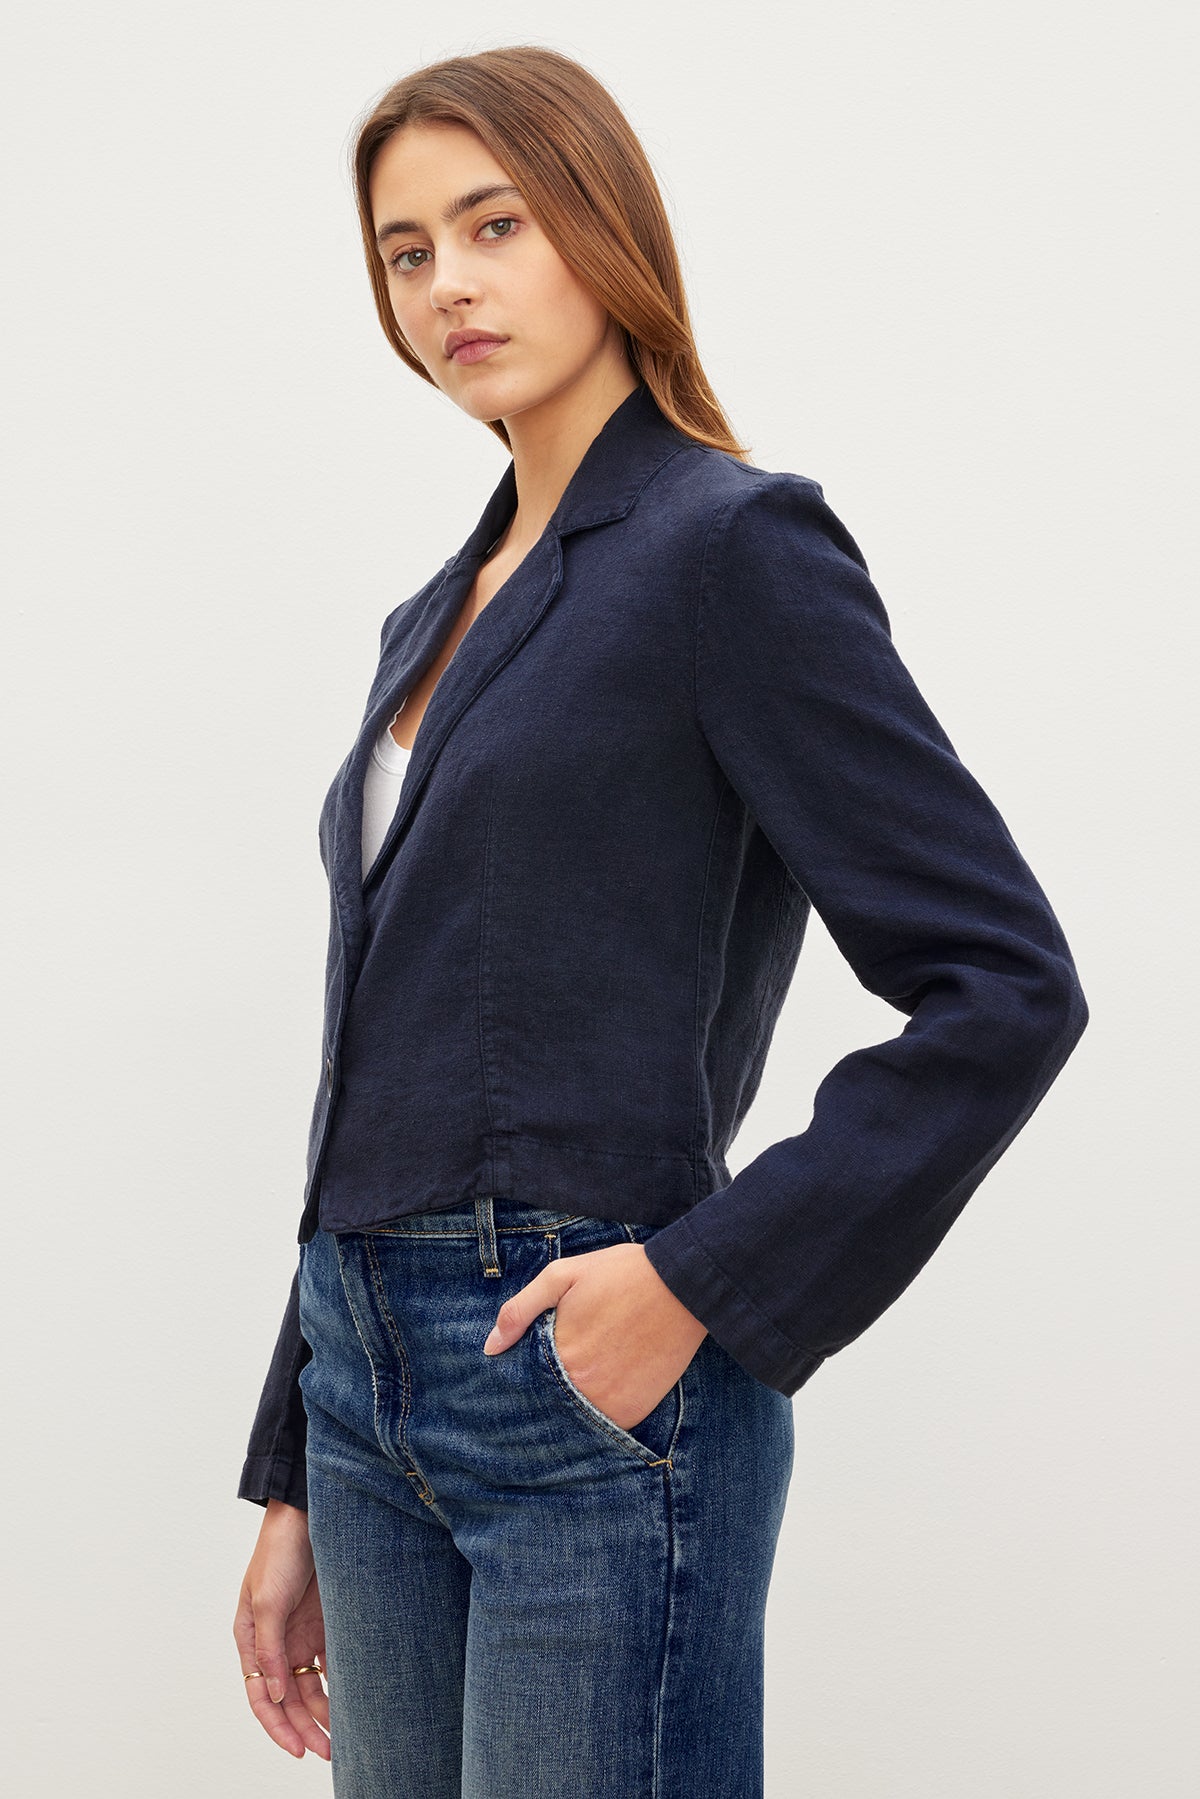 The model is wearing a Velvet by Graham & Spencer FINLEY HEAVY LINEN CROPPED BLAZER and jeans.-35982562656449